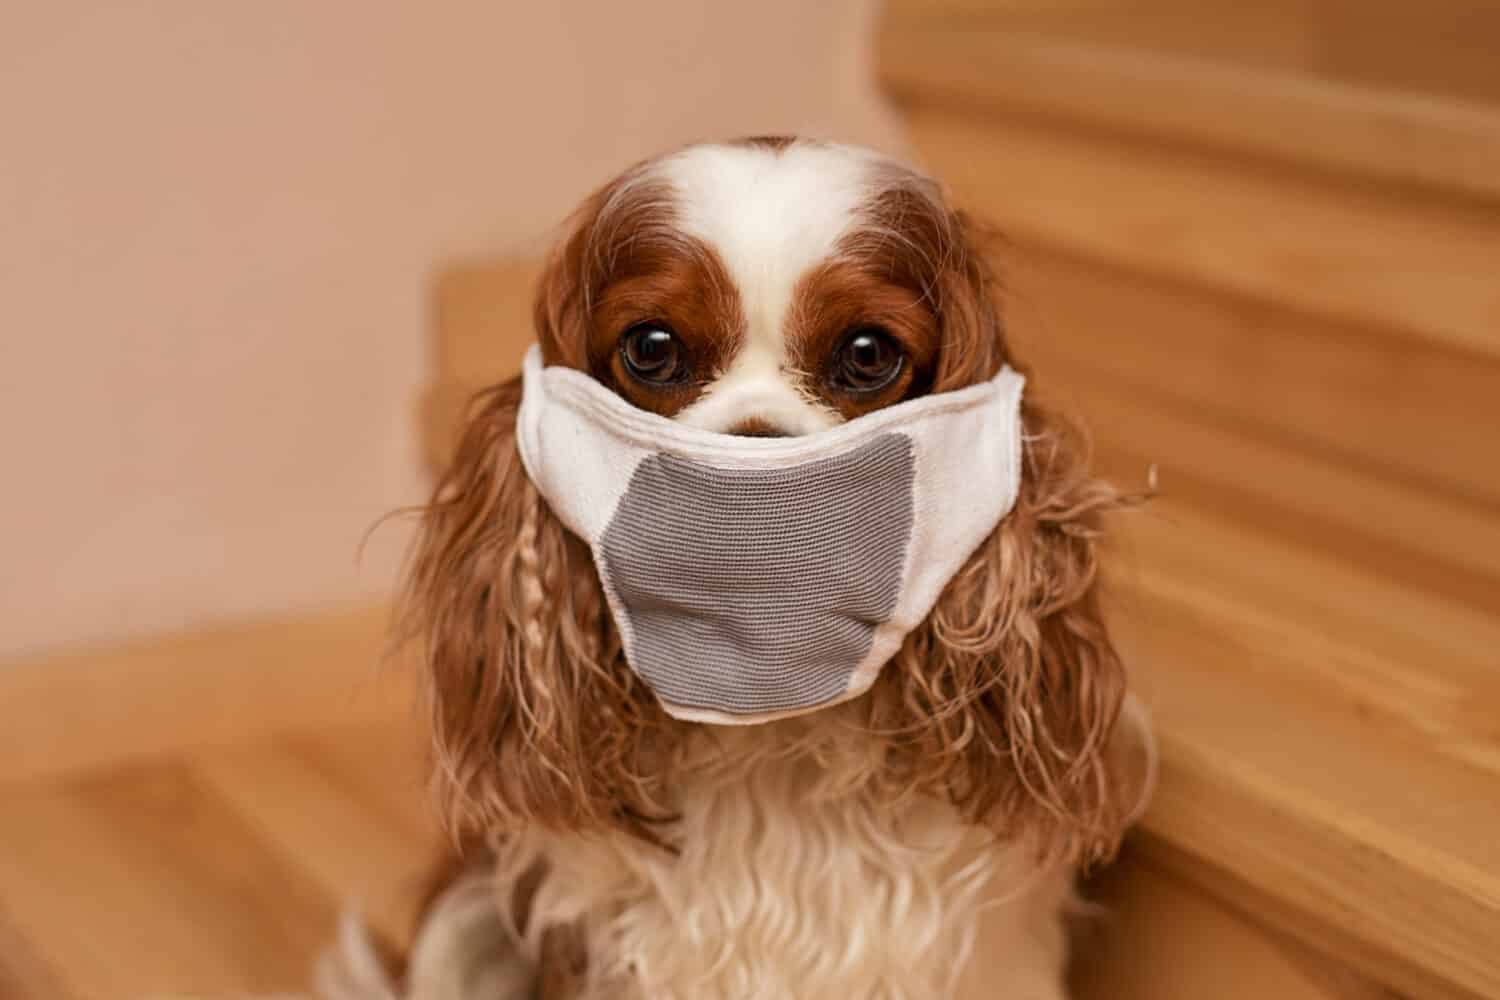 Pet dog sits in a mask and looks at the camera on the stairs in home. Cavalier King Charles Spaniel. Close-up photo. The safety of family members, covid-19. Autumn winter is season of colds. Take care